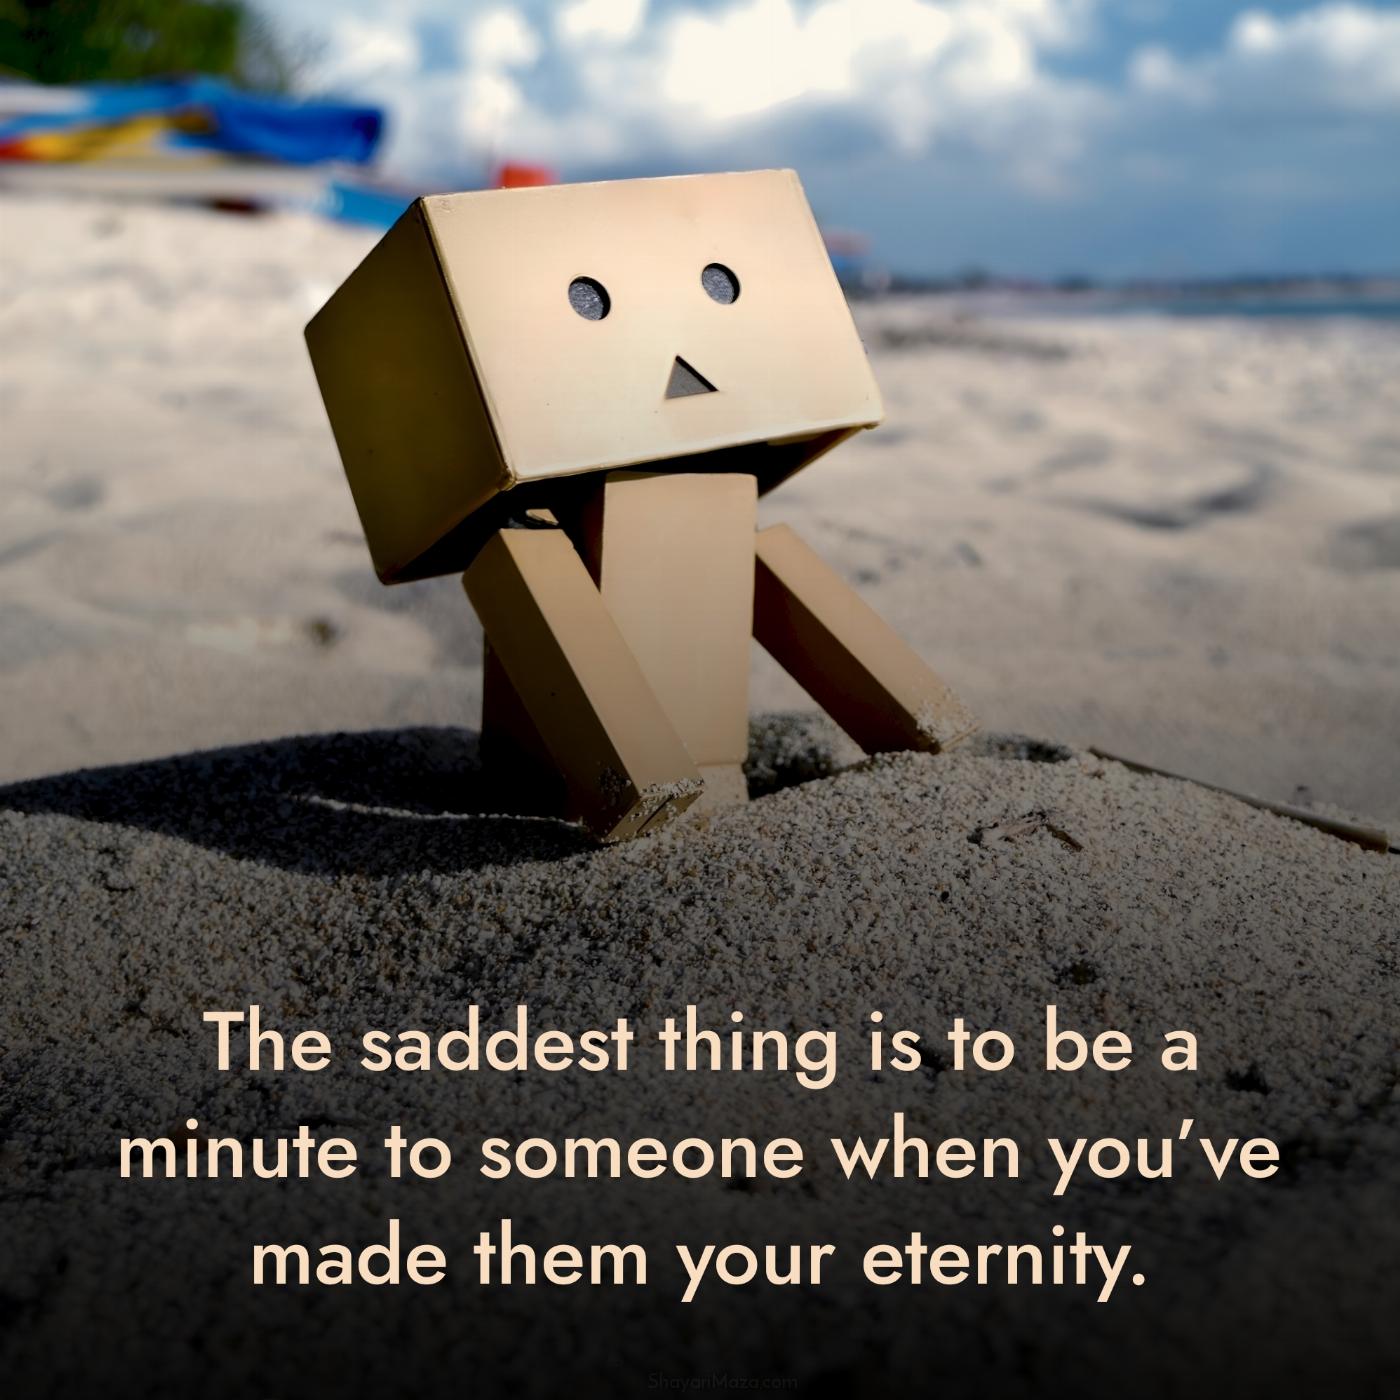 The saddest thing is to be a minute to someone when